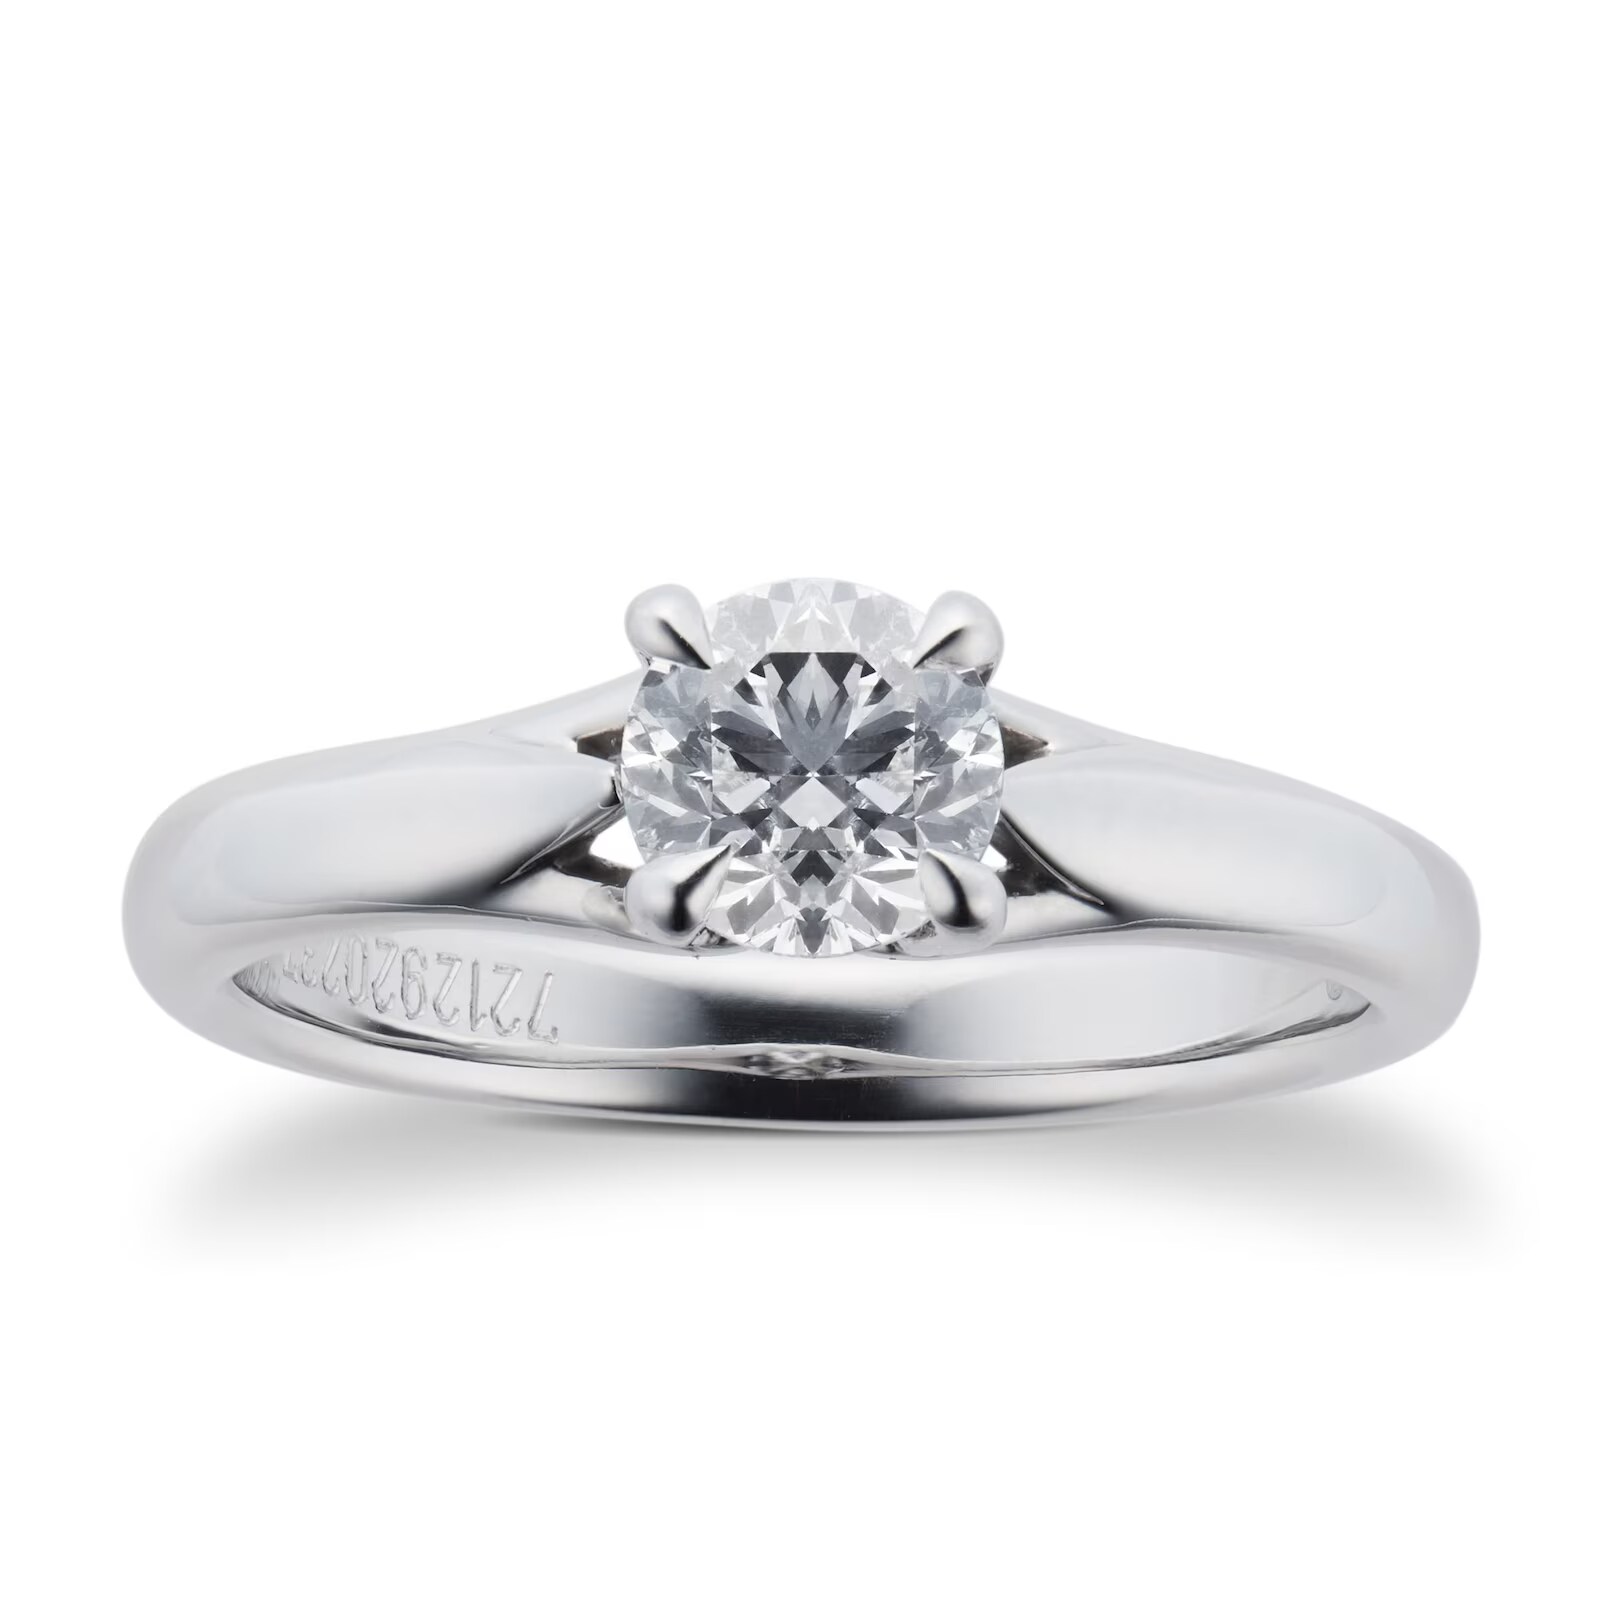 Ena Harkness Engagement Ring 0.70 Carat - Ring Size N